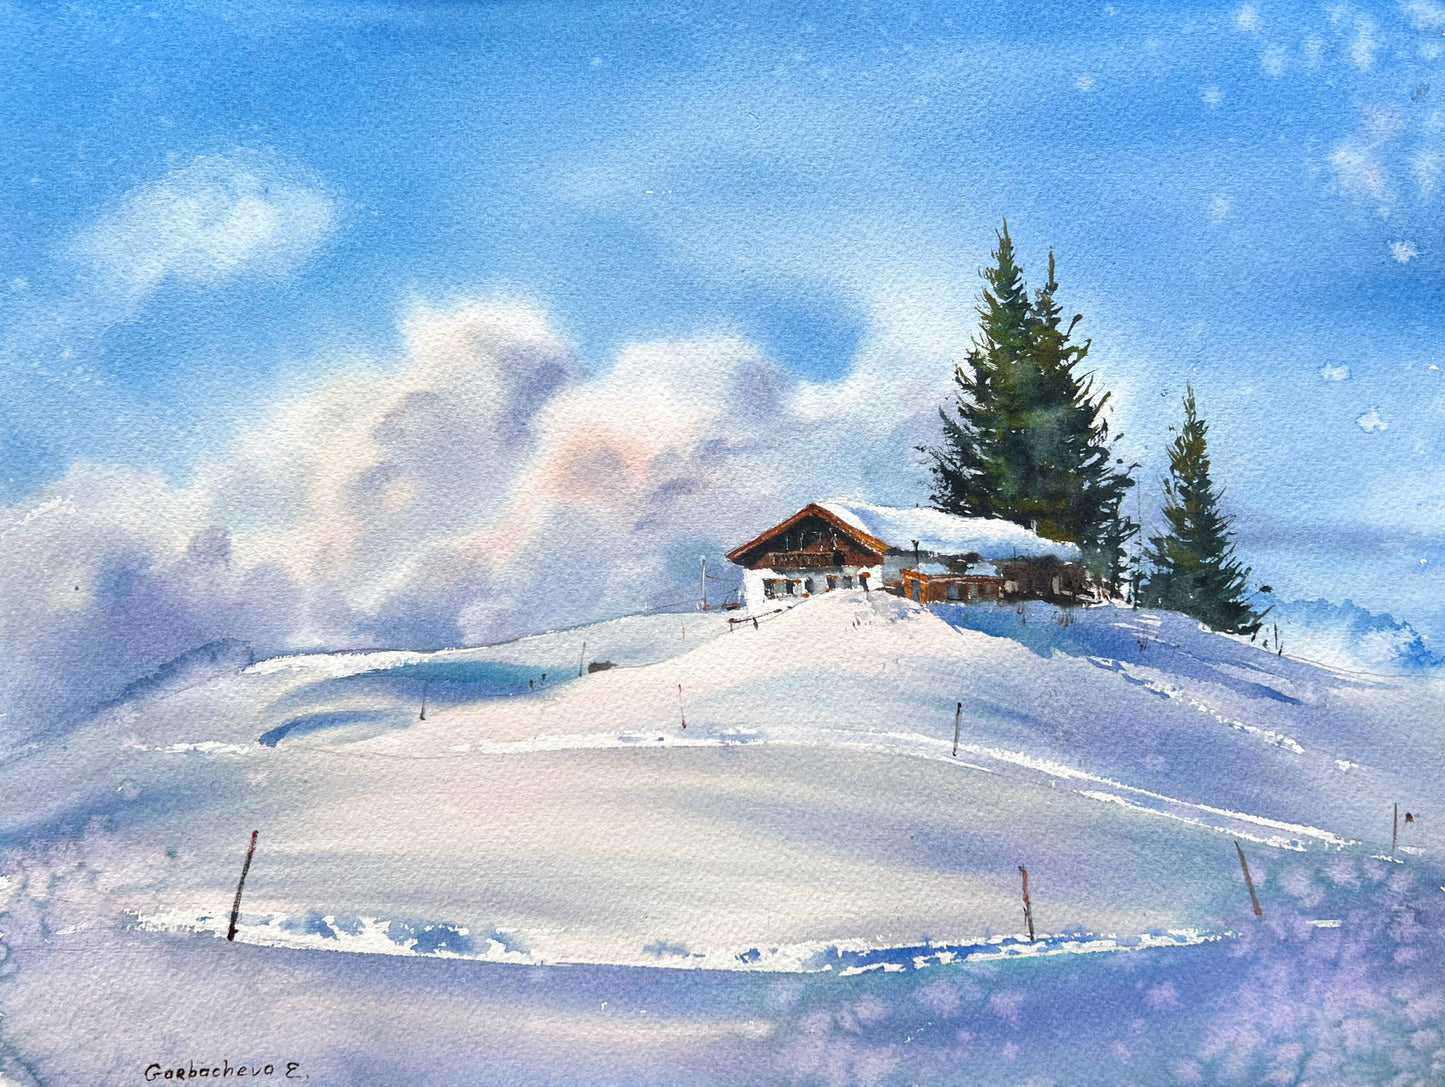 Mountain Chalet Painting, Original Artwork, Snowy Mountains, Watercolor Winter Landscape, Christmas Gift For Ski Lover